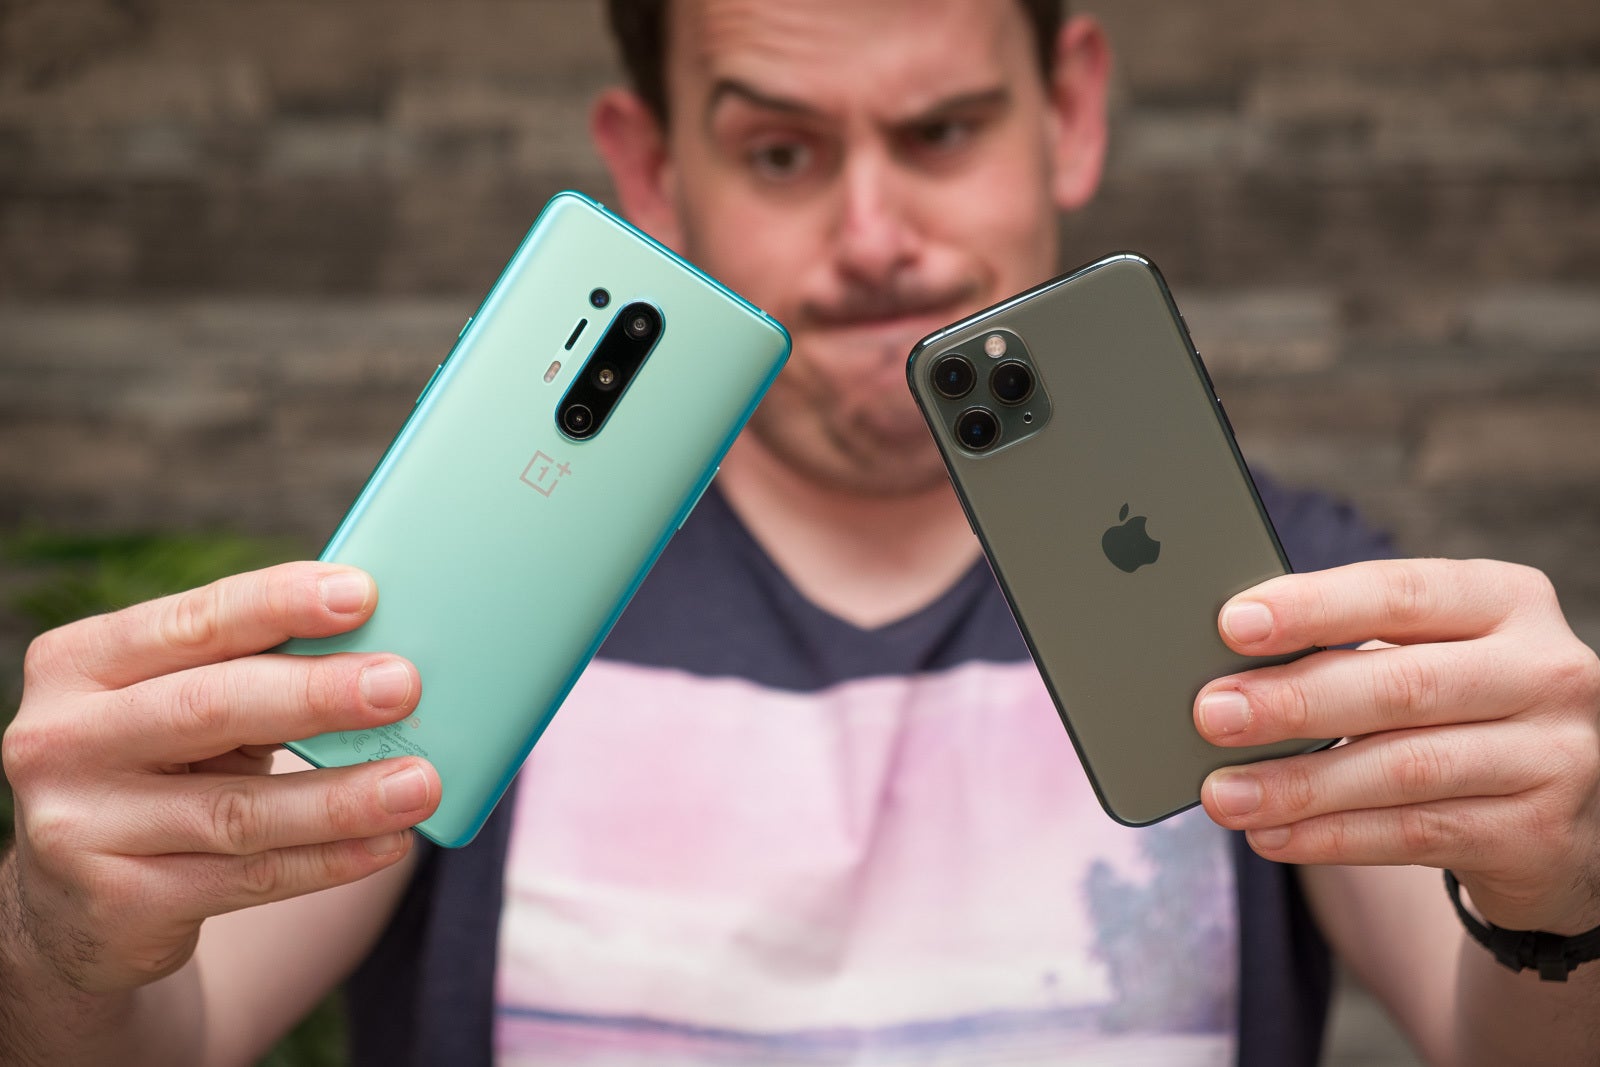 OnePlus 8 Pro vs iPhone 11 Pro camera comparison. Is it an even match?